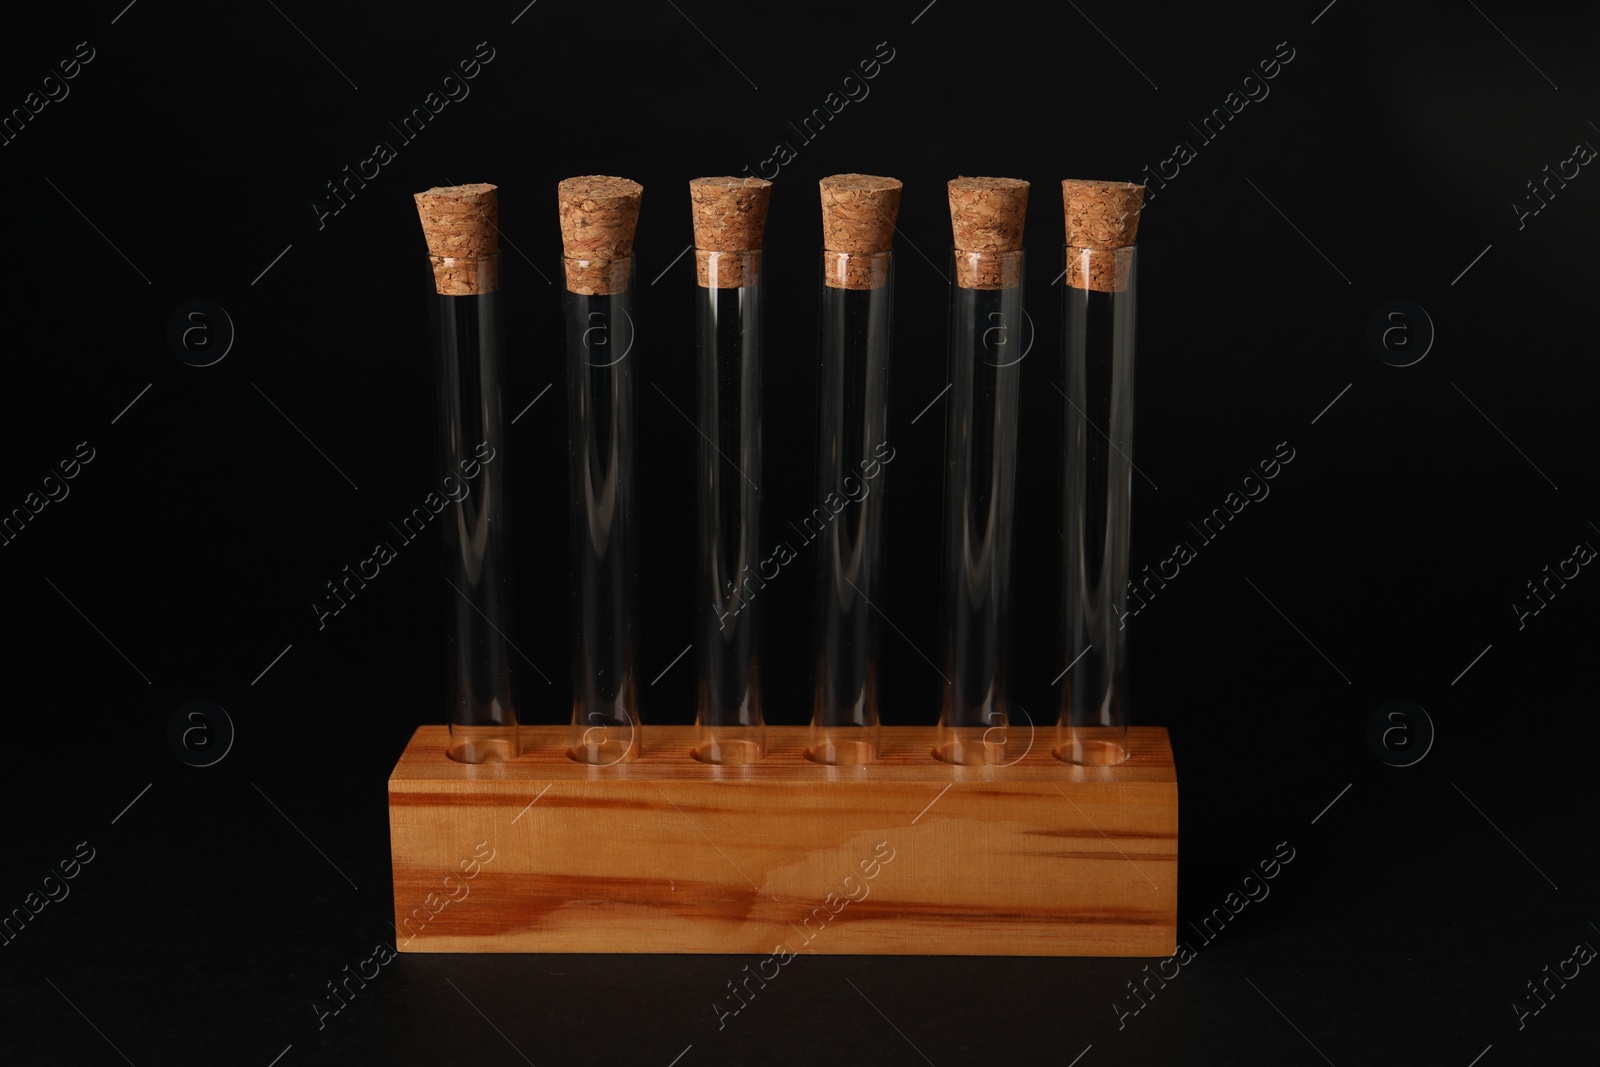 Photo of Test tubes in wooden stand on black background. Laboratory glassware